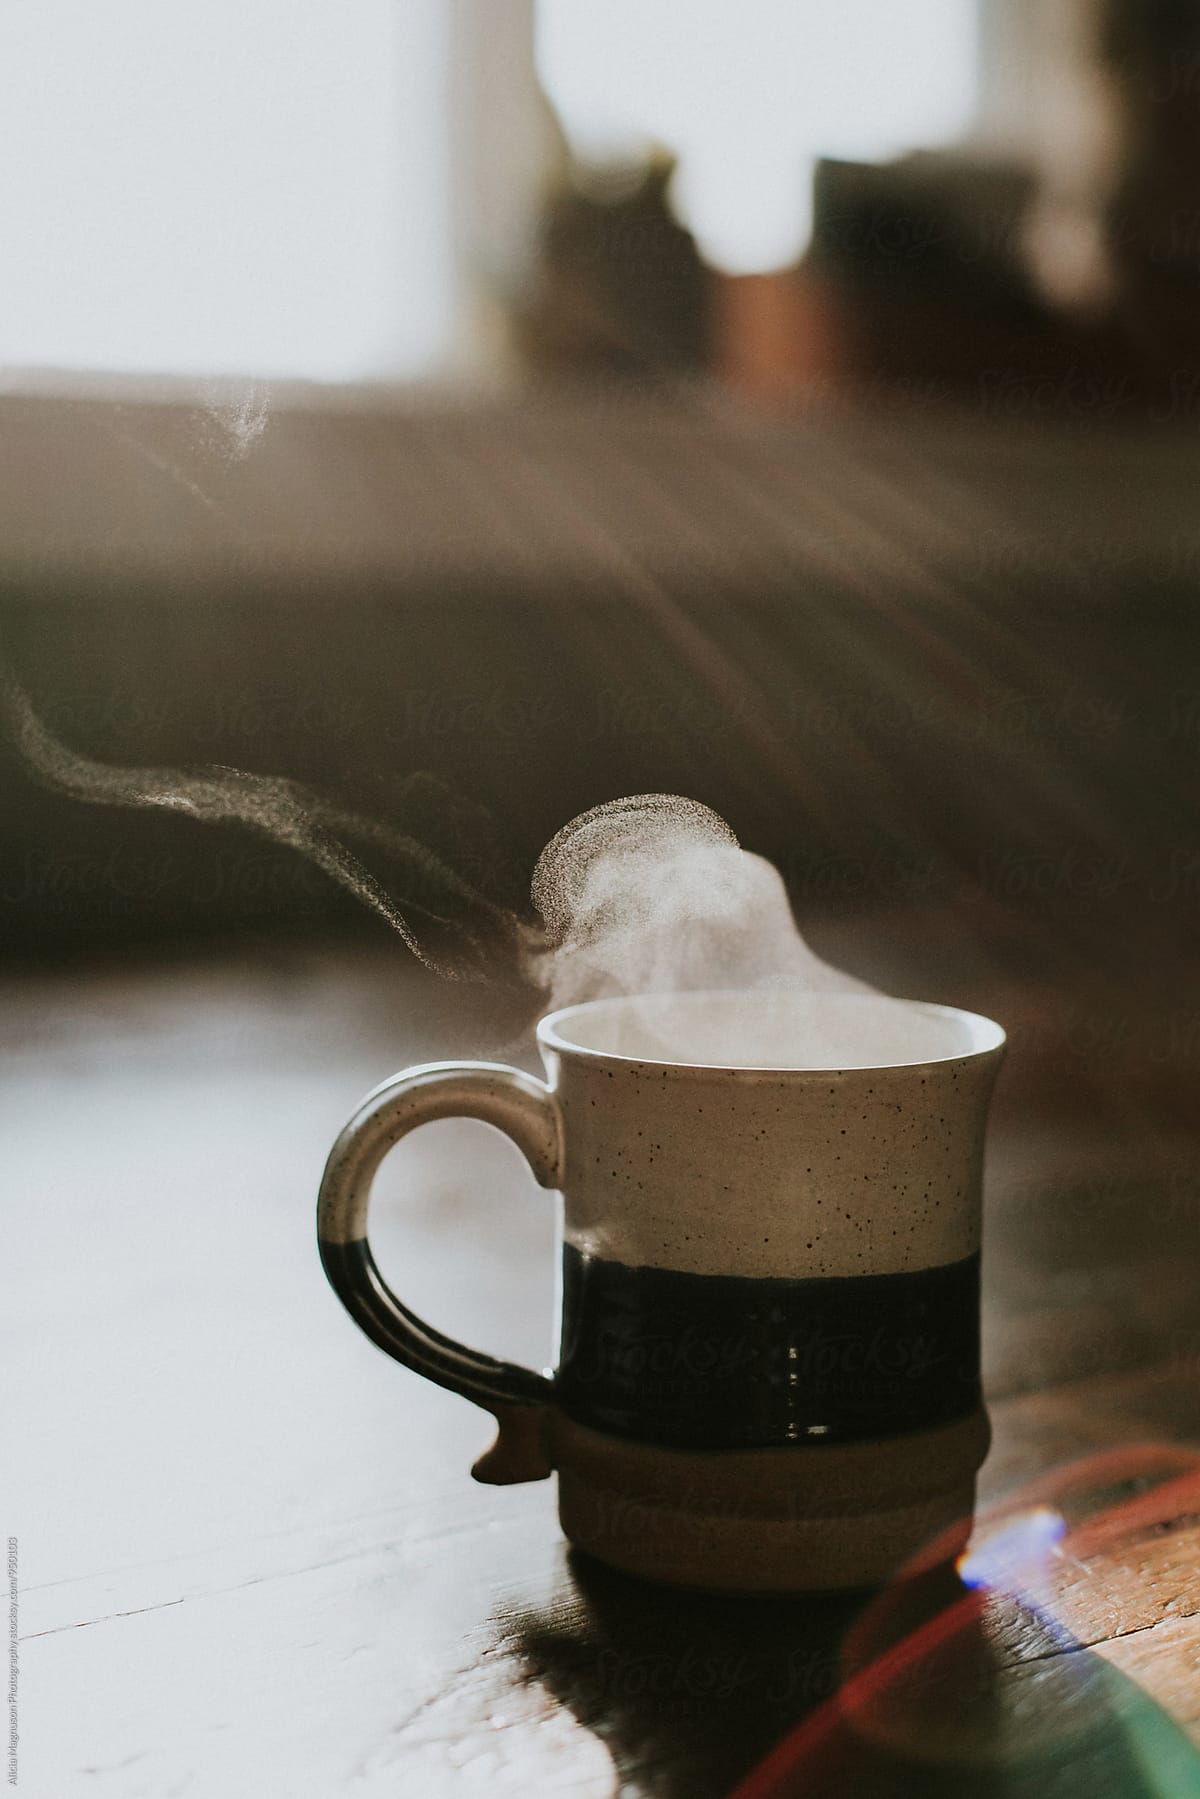 Steaming Coffee  Cup On Table by Alicia Magnuson 